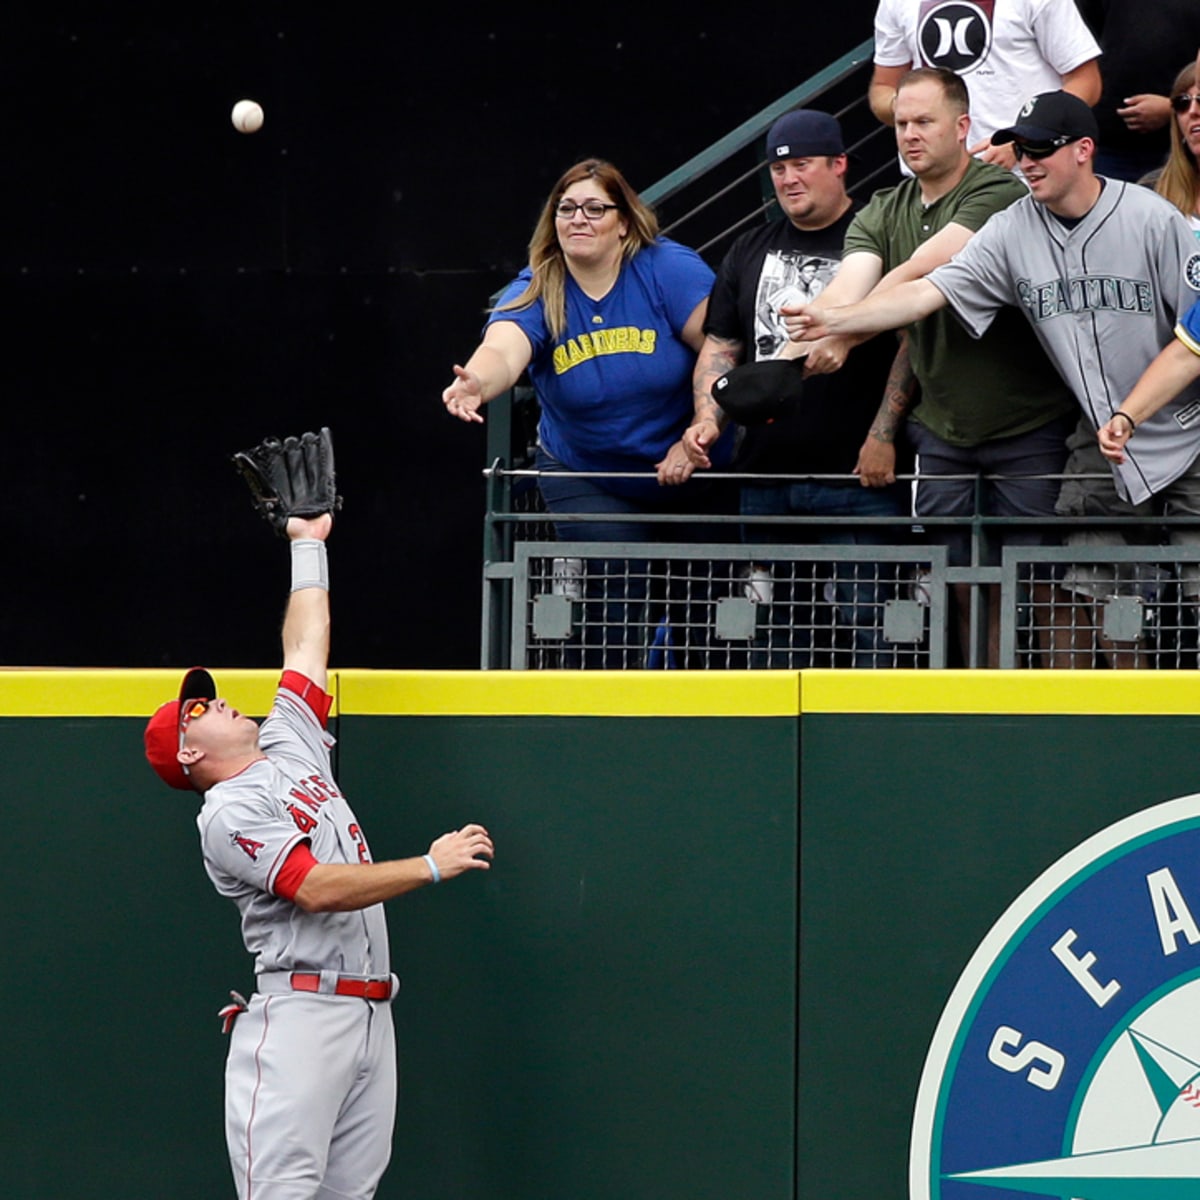 Mike Trout robs grand slam on birthday (video) - SI Kids: Sports